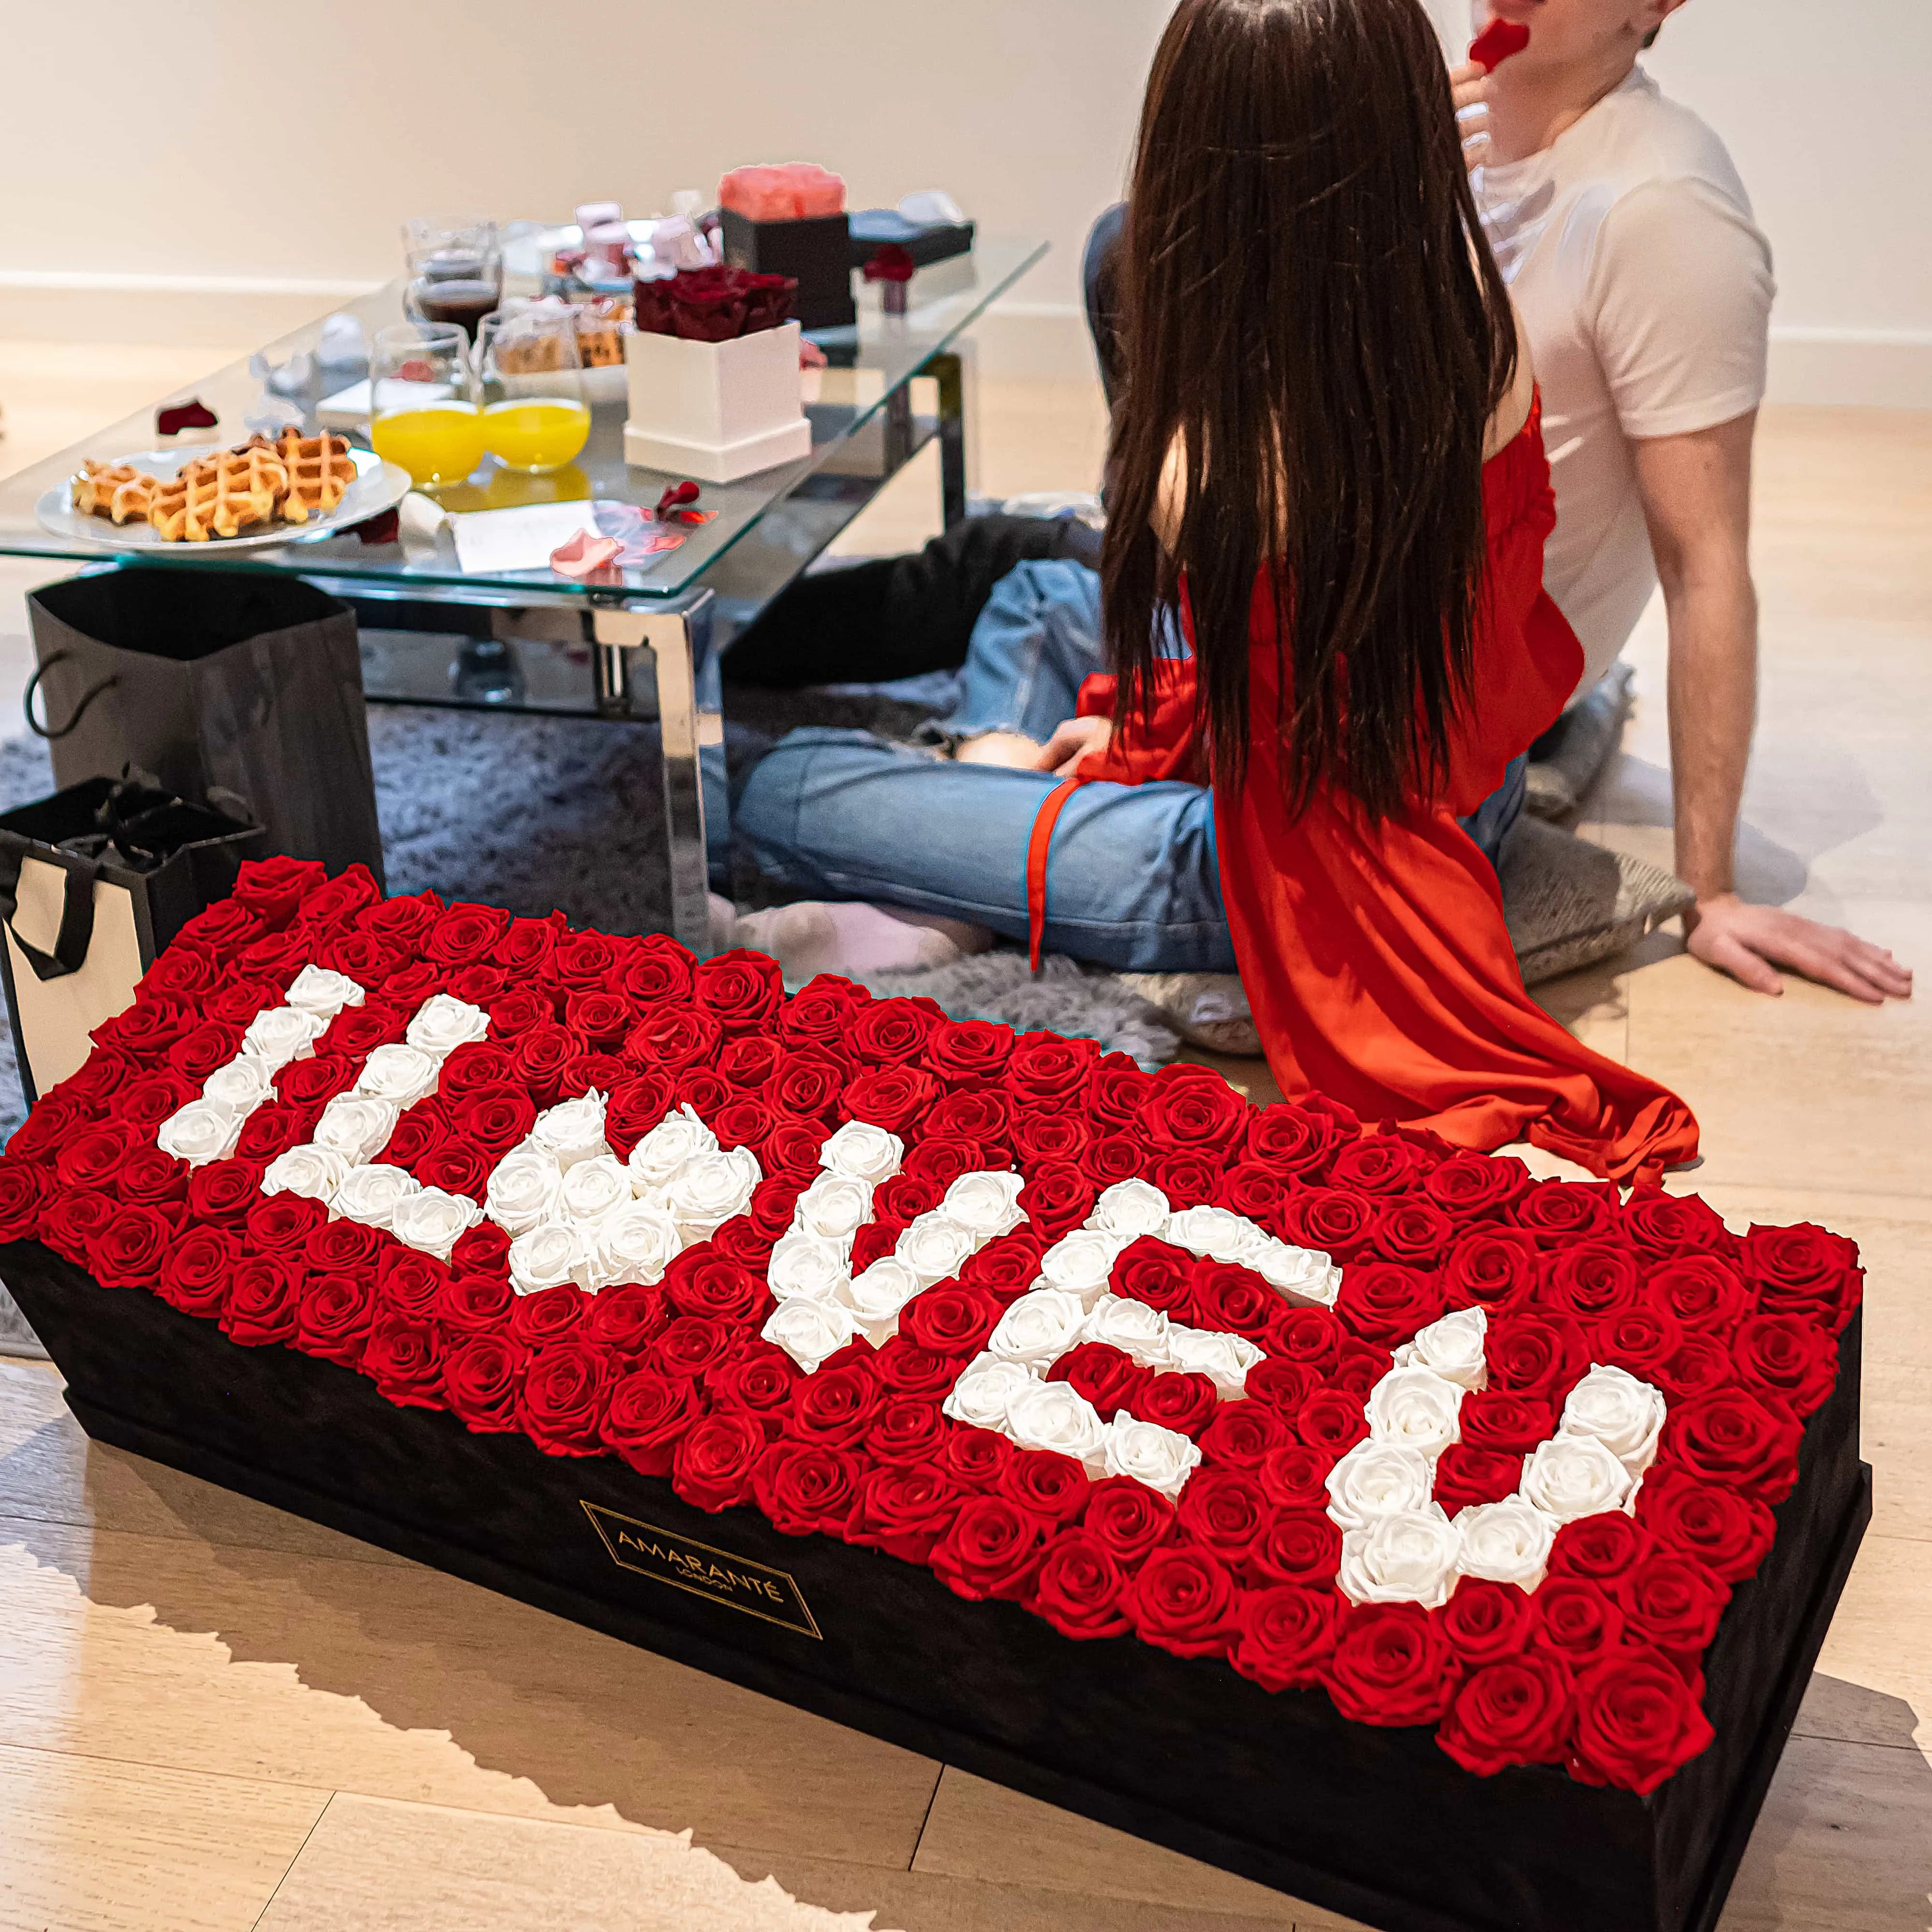 Create an unforgettable impression with the ultimate rose box with a personalised message created from infinity roses